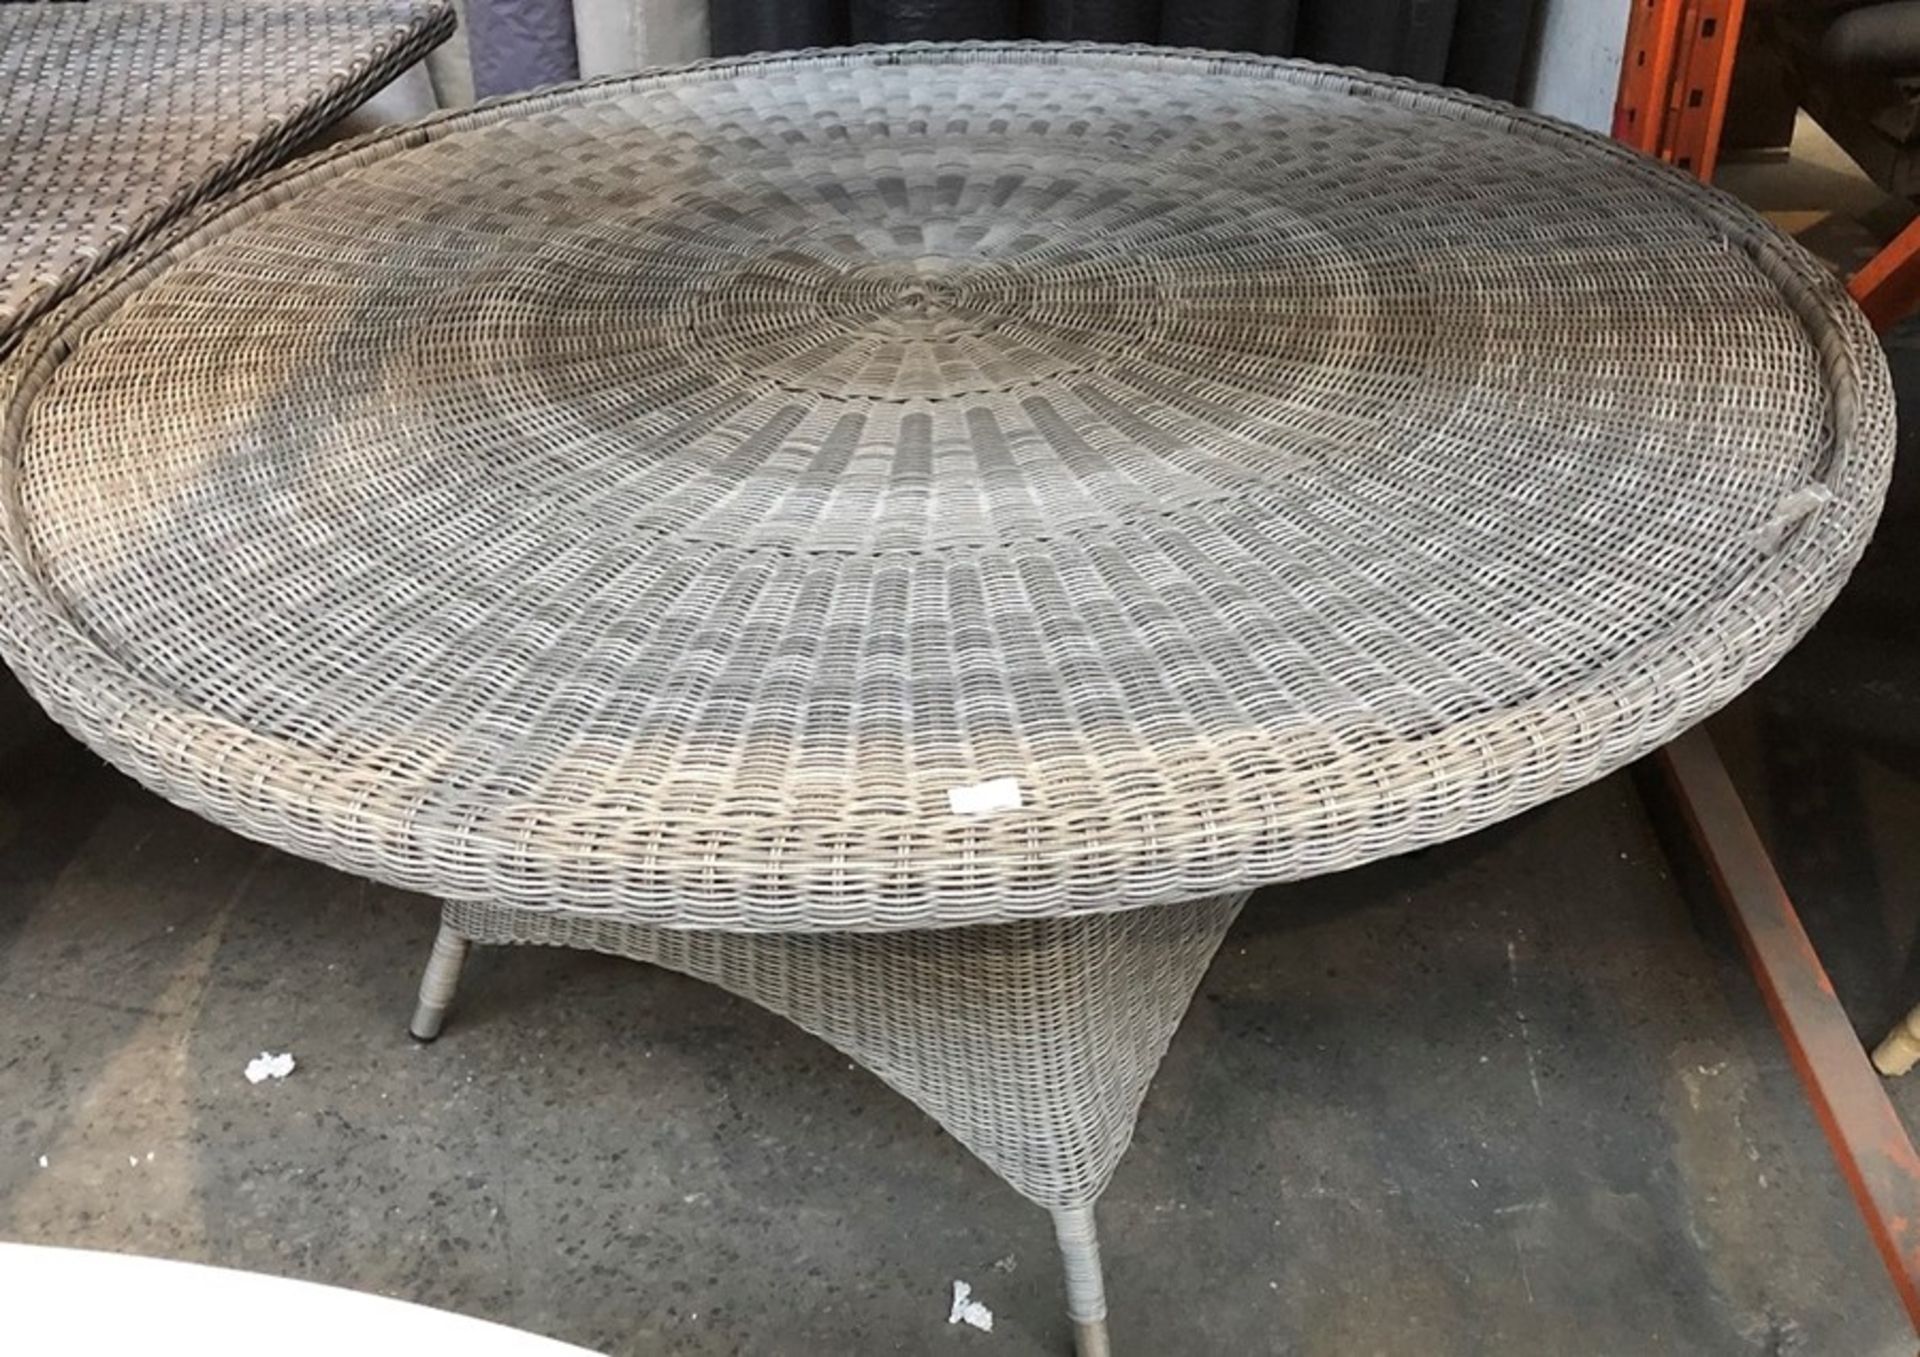 JOHN LEWIS RATTAN LARGE ROUND OUTDOOR DINING TABLE GREY